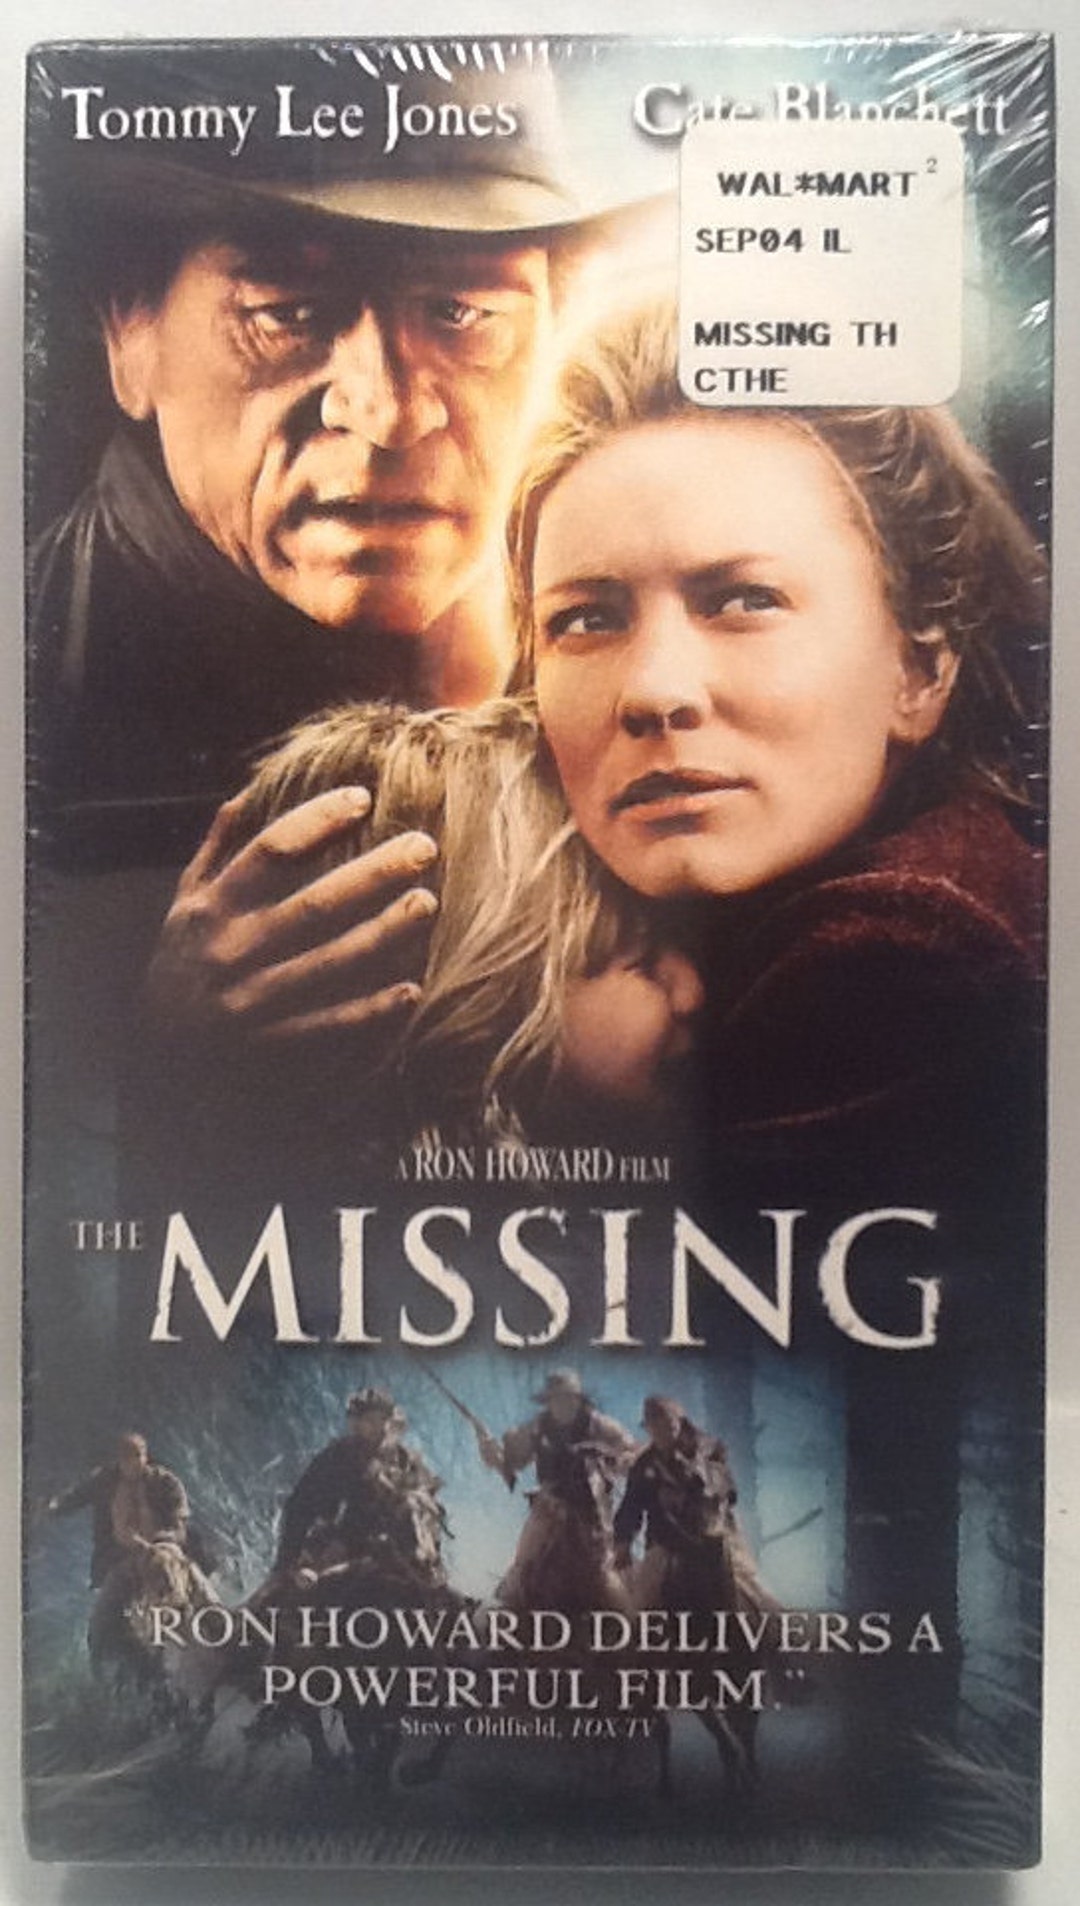 FACTORY SEALED the Missing VHS Tommy Lee Jones Cate Blanchett - Etsy New  Zealand